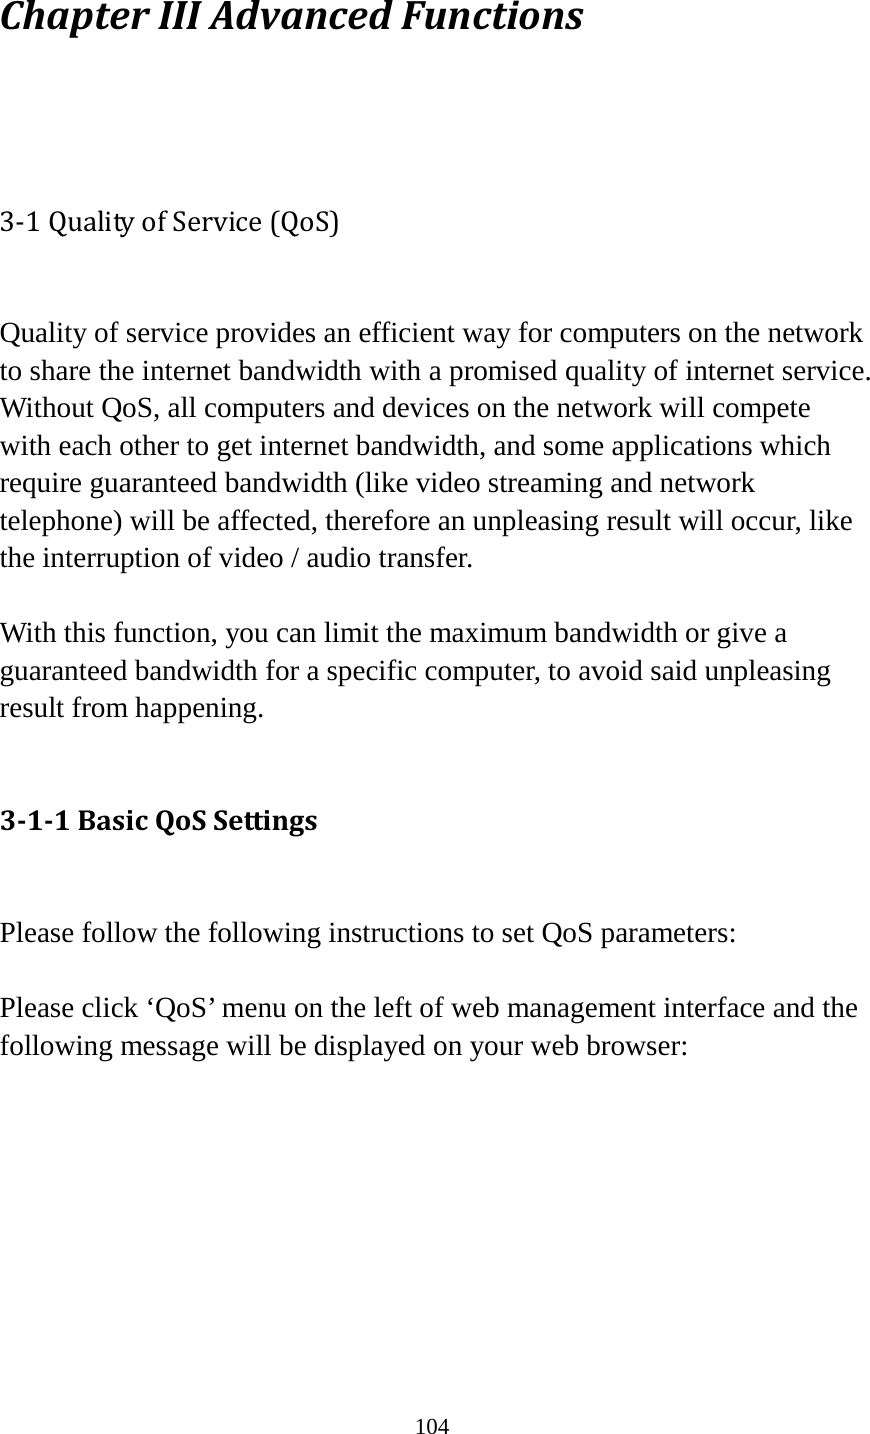 104 Chapter III Advanced Functions  3-1 Quality of Service (QoS)  Quality of service provides an efficient way for computers on the network to share the internet bandwidth with a promised quality of internet service. Without QoS, all computers and devices on the network will compete with each other to get internet bandwidth, and some applications which require guaranteed bandwidth (like video streaming and network telephone) will be affected, therefore an unpleasing result will occur, like the interruption of video / audio transfer.    With this function, you can limit the maximum bandwidth or give a guaranteed bandwidth for a specific computer, to avoid said unpleasing result from happening.  3-1-1 Basic QoS Settings  Please follow the following instructions to set QoS parameters:  Please click ‘QoS’ menu on the left of web management interface and the following message will be displayed on your web browser:         